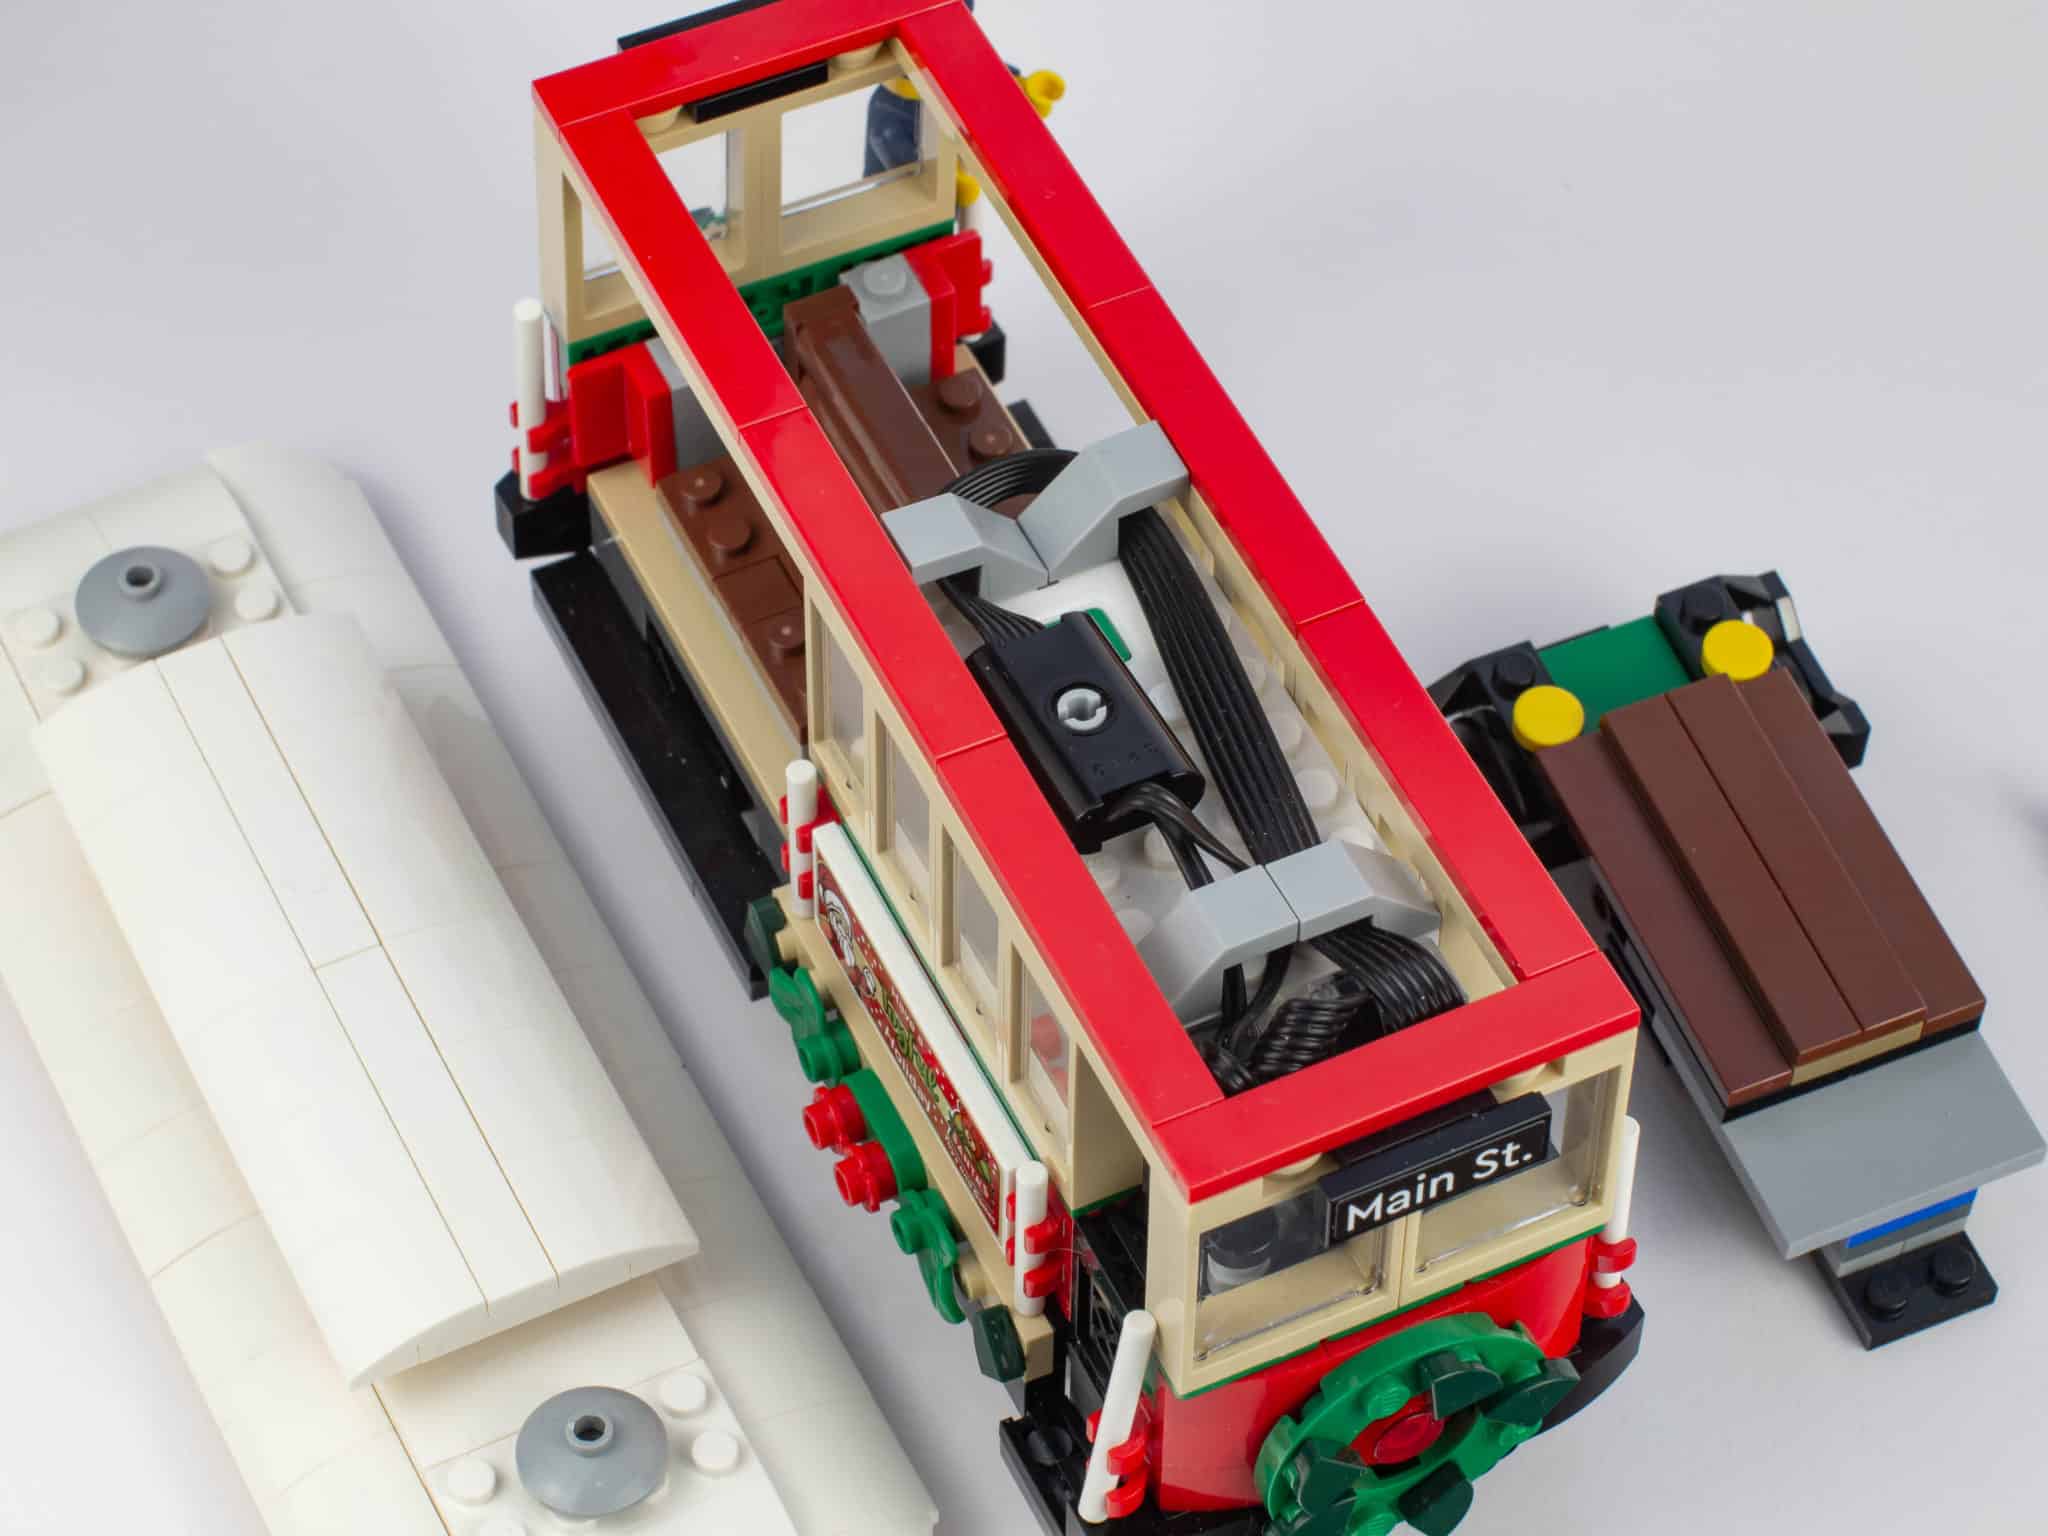 Review LEGO 10308 Holiday Main Street 77